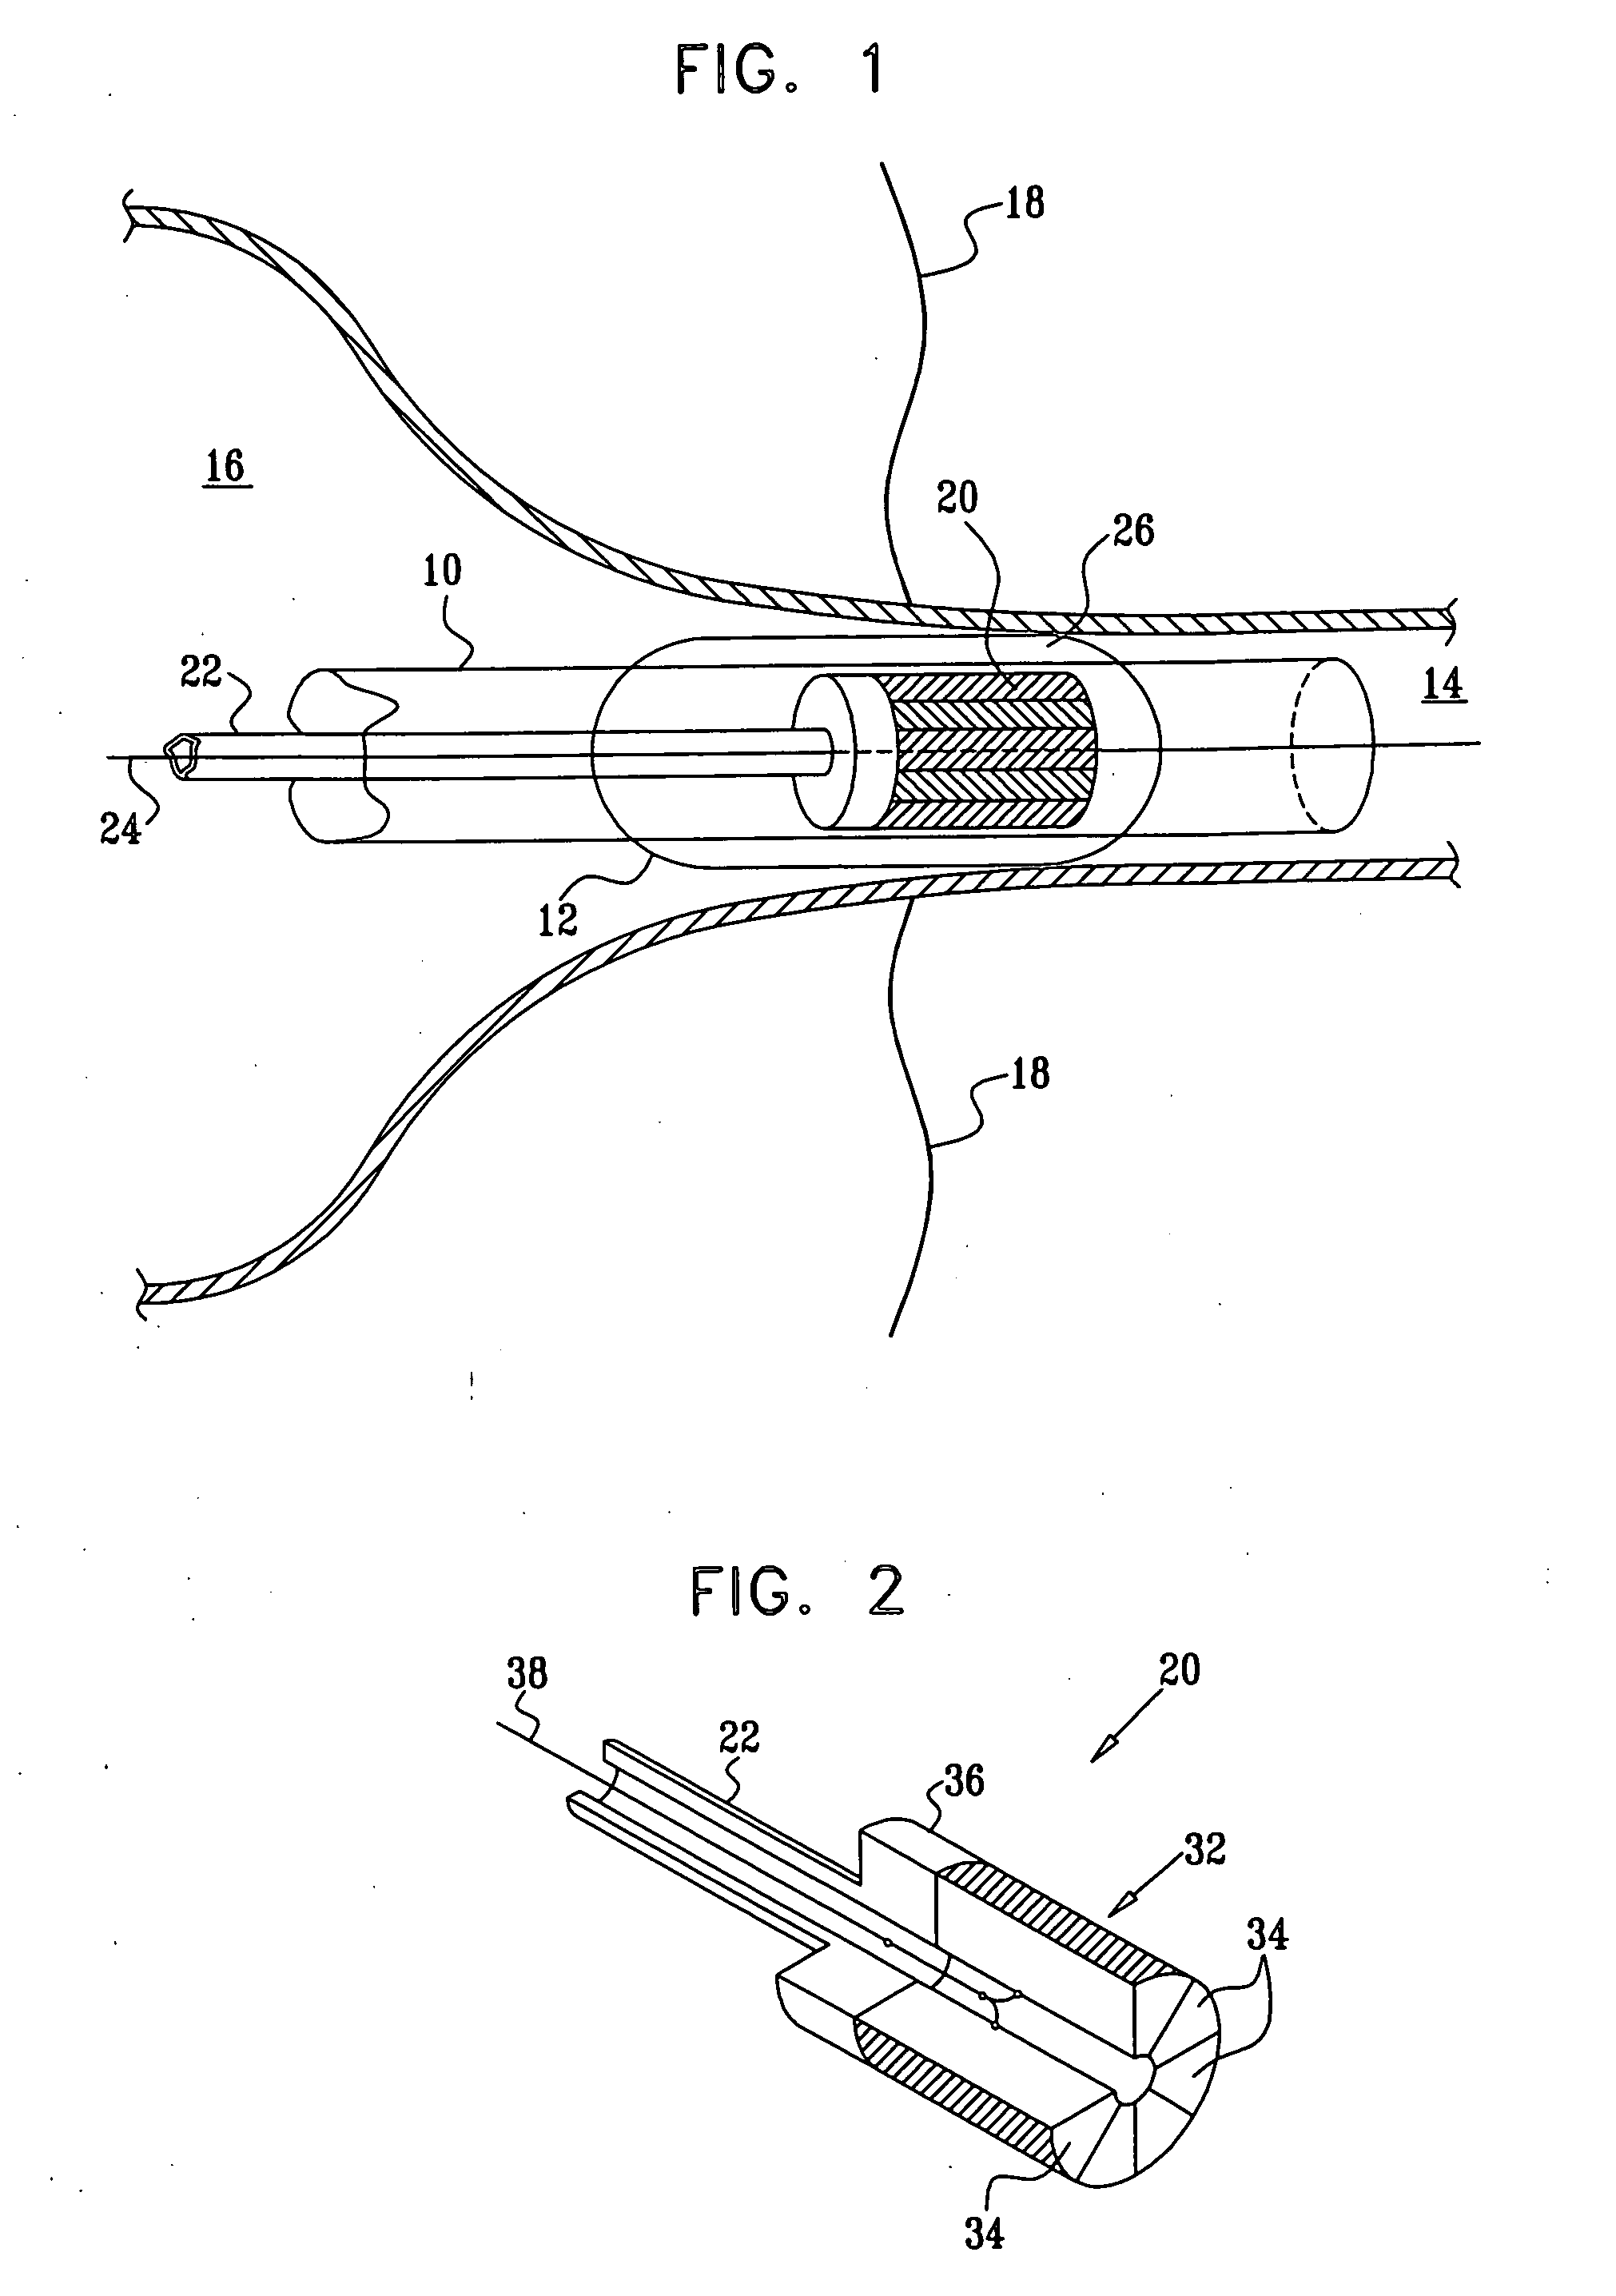 Phased-array for tissue treatment